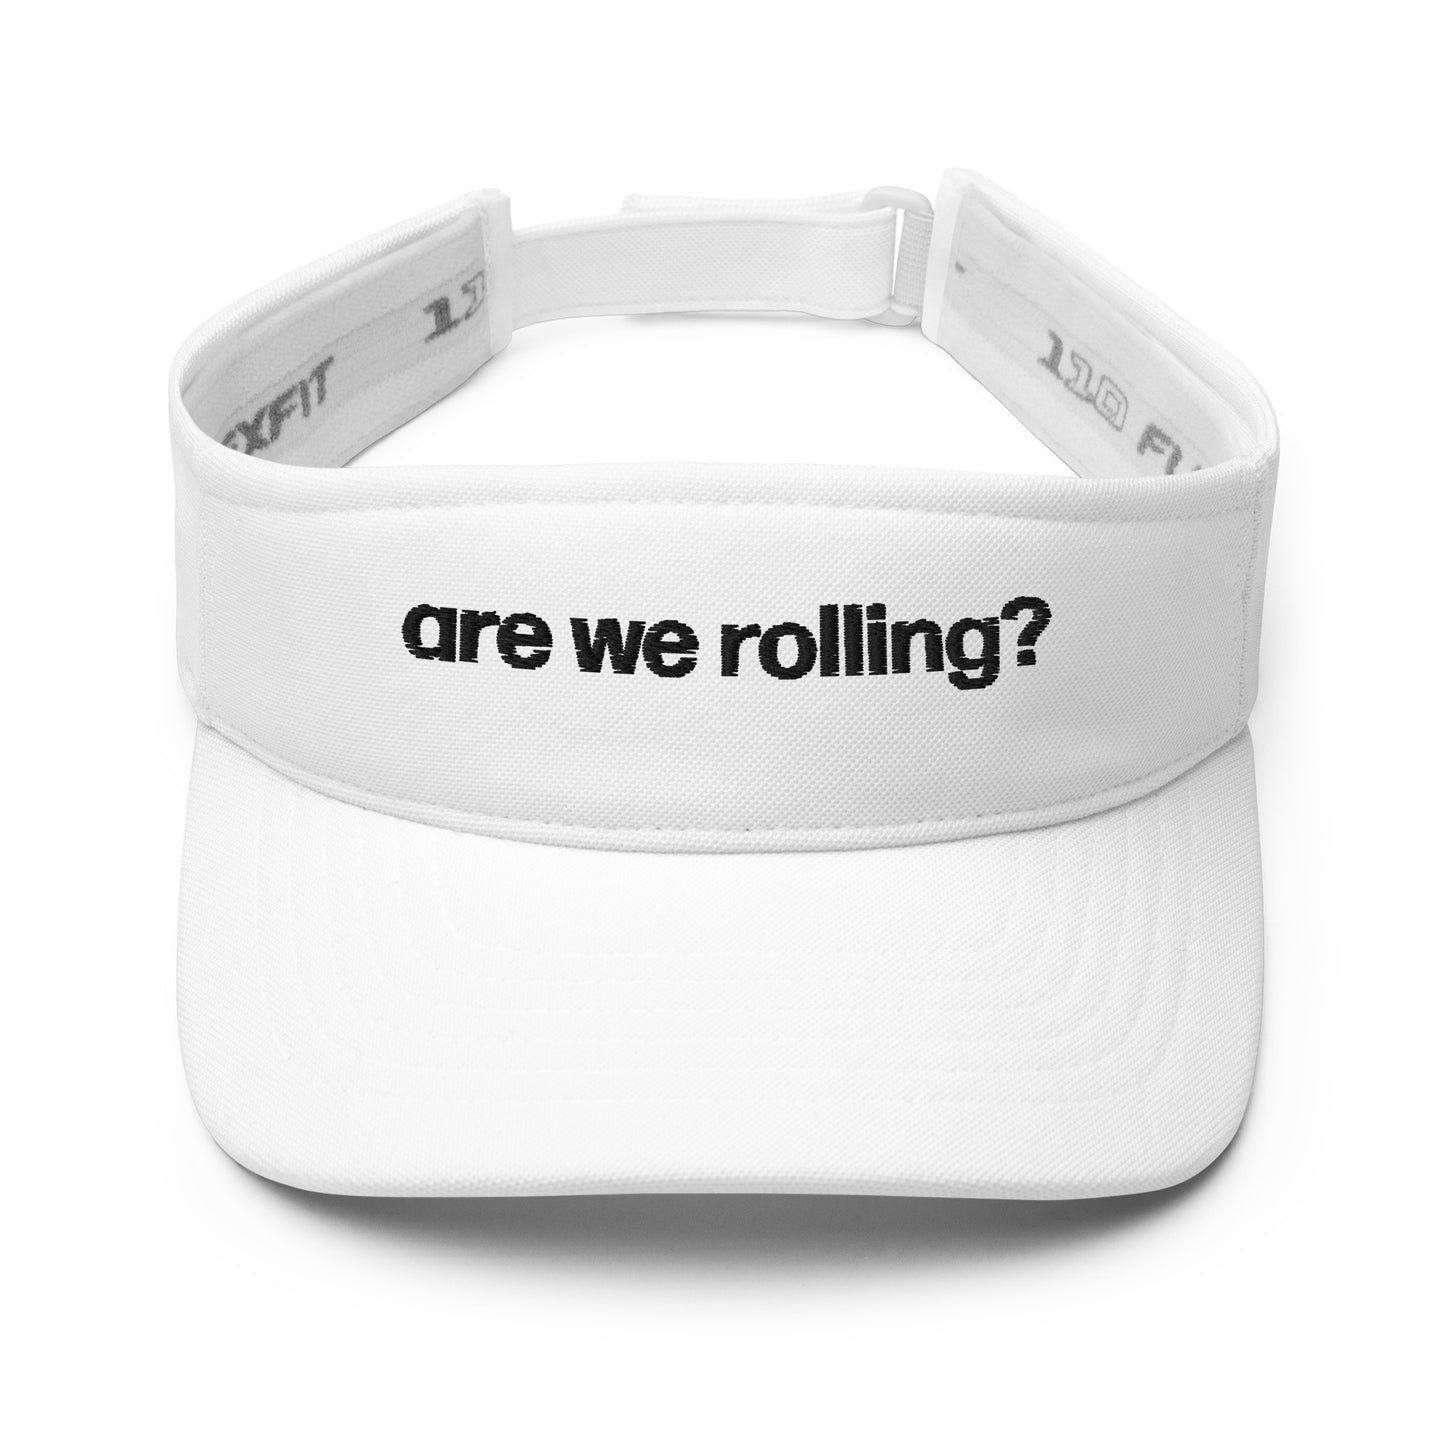 are we rolling? | visor